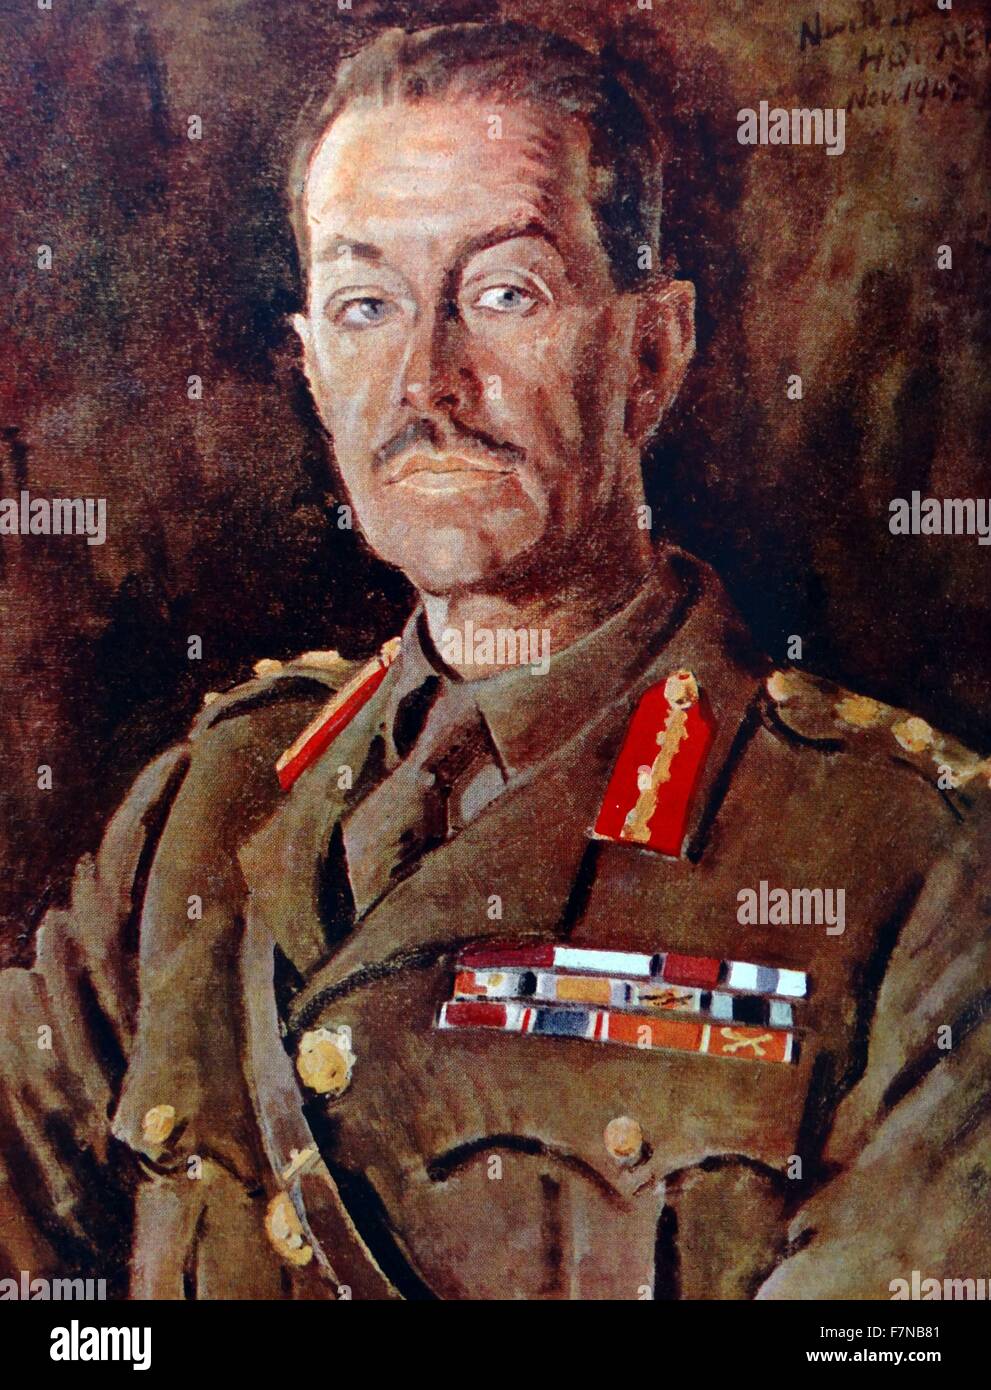 Colour portrait of Harold Alexander, 1st Earl Alexander of Tunis (1891-1969) British military commander and field marshal. Dated 1940 Stock Photo